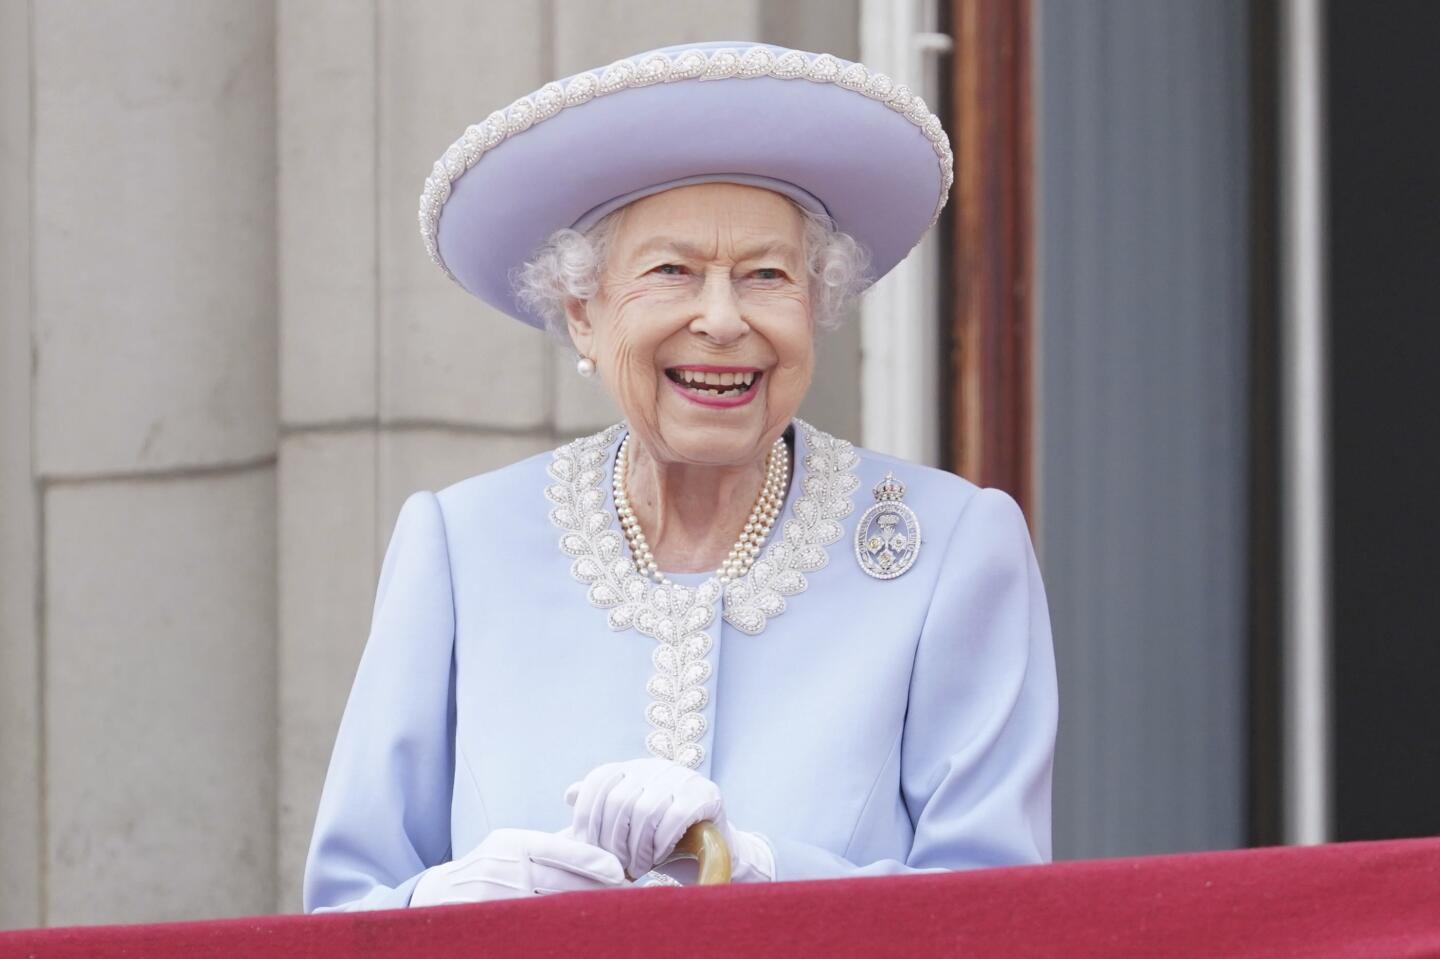 Queen Elizabeth II, whose 70-year reign as Britain’s monarch saw the country transform from an outsize, if insular, imperial power into a modest, multicultural European nation, died at 96. As the first child of Prince Albert, the Duke of York, and the first grandchild of the reigning King George V, she was born a princess but never intended to be queen. She married Prince Philip in 1947, and after a series of events and the death of her father, who had taken the name King George VI, she became queen in 1952. Britain's longest-serving monarch endured through 15 prime ministers, from Winston Churchill to Liz Truss, becoming an institution and an icon of stability and unity.